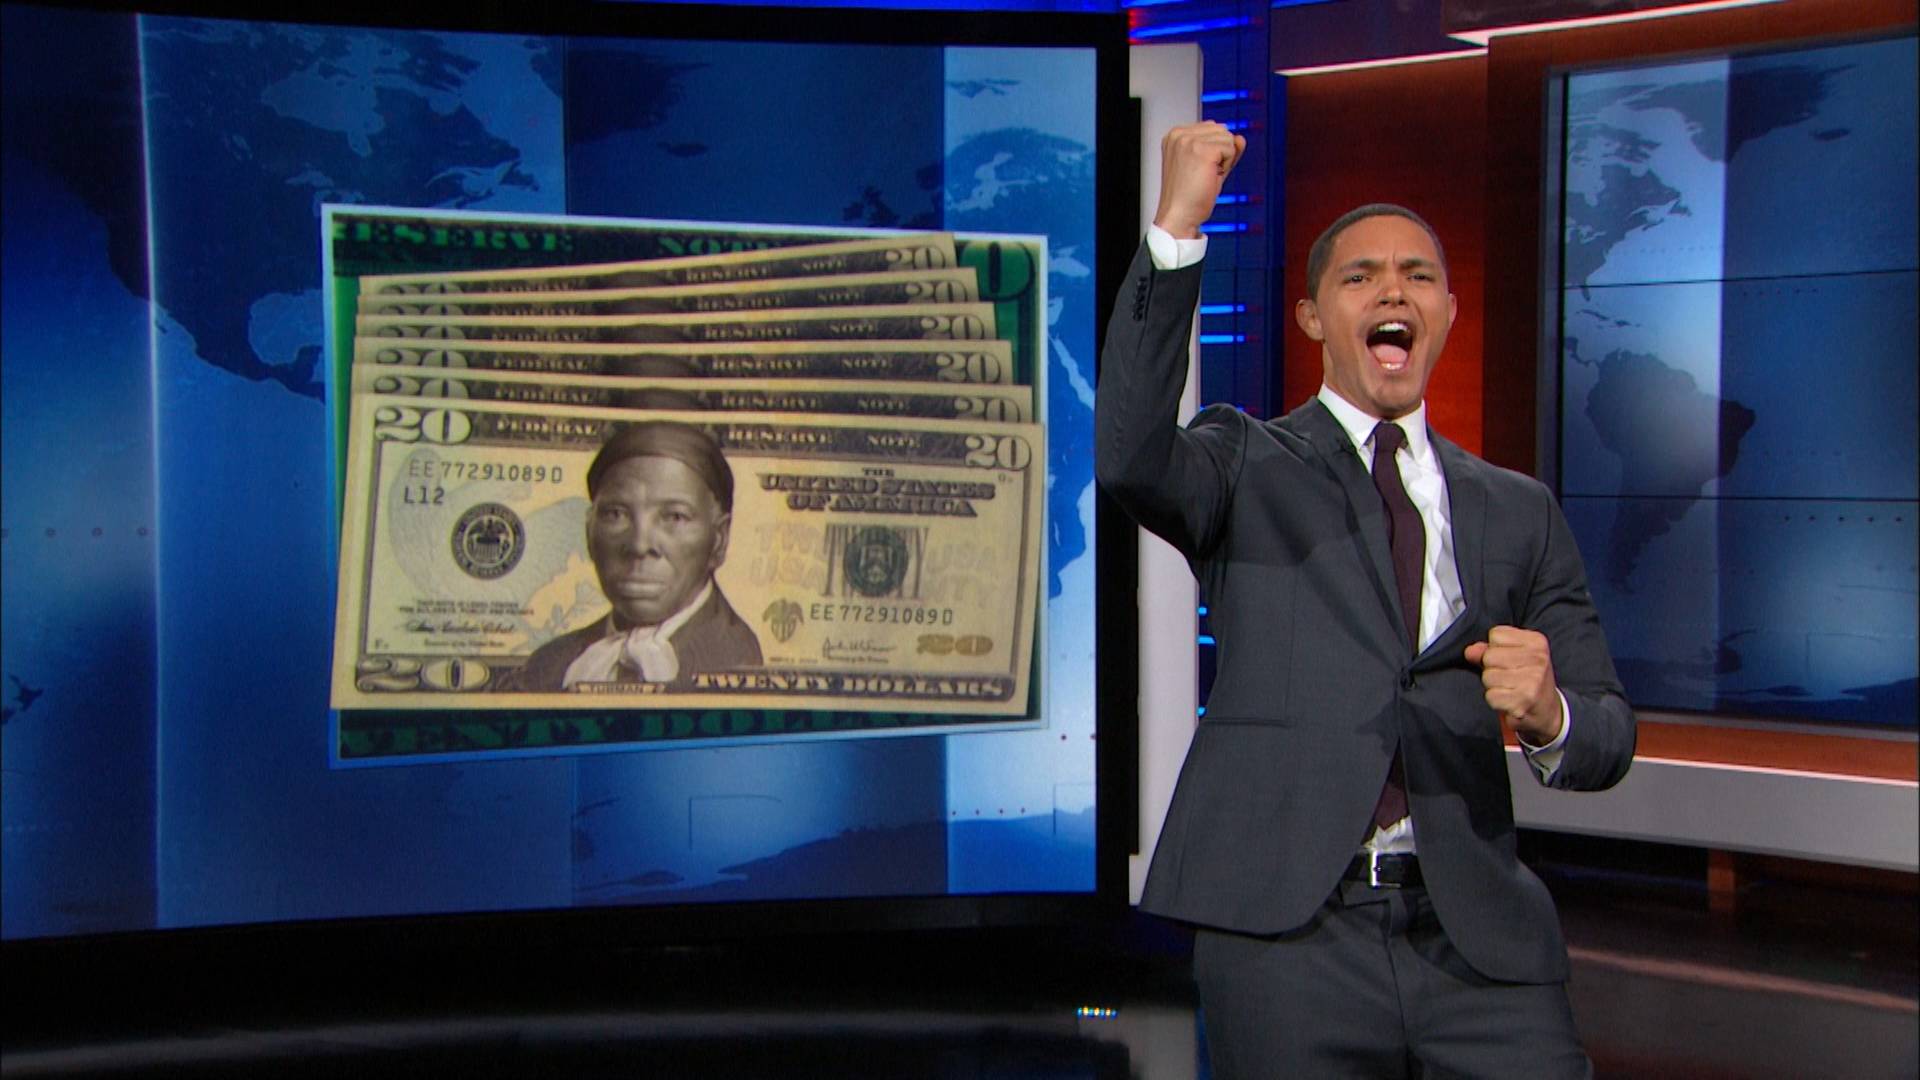 Harriet Tubman to Be the New Face of the $20 Bill - The Daily Show